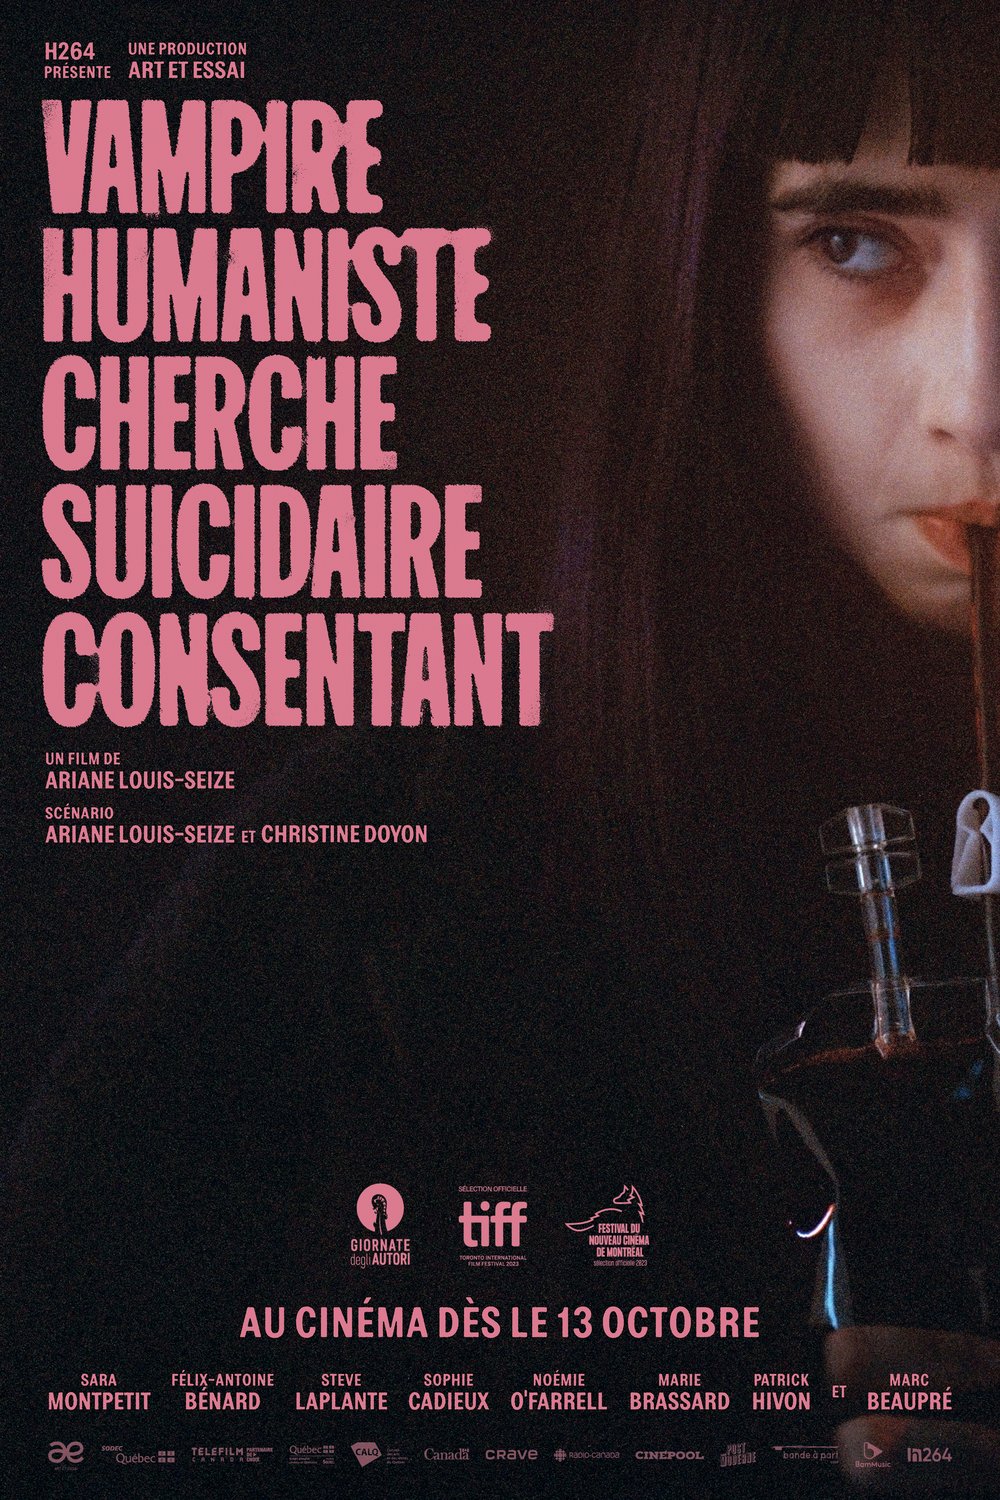 Poster of the movie Vampire humaniste cherche suicidaire consentant